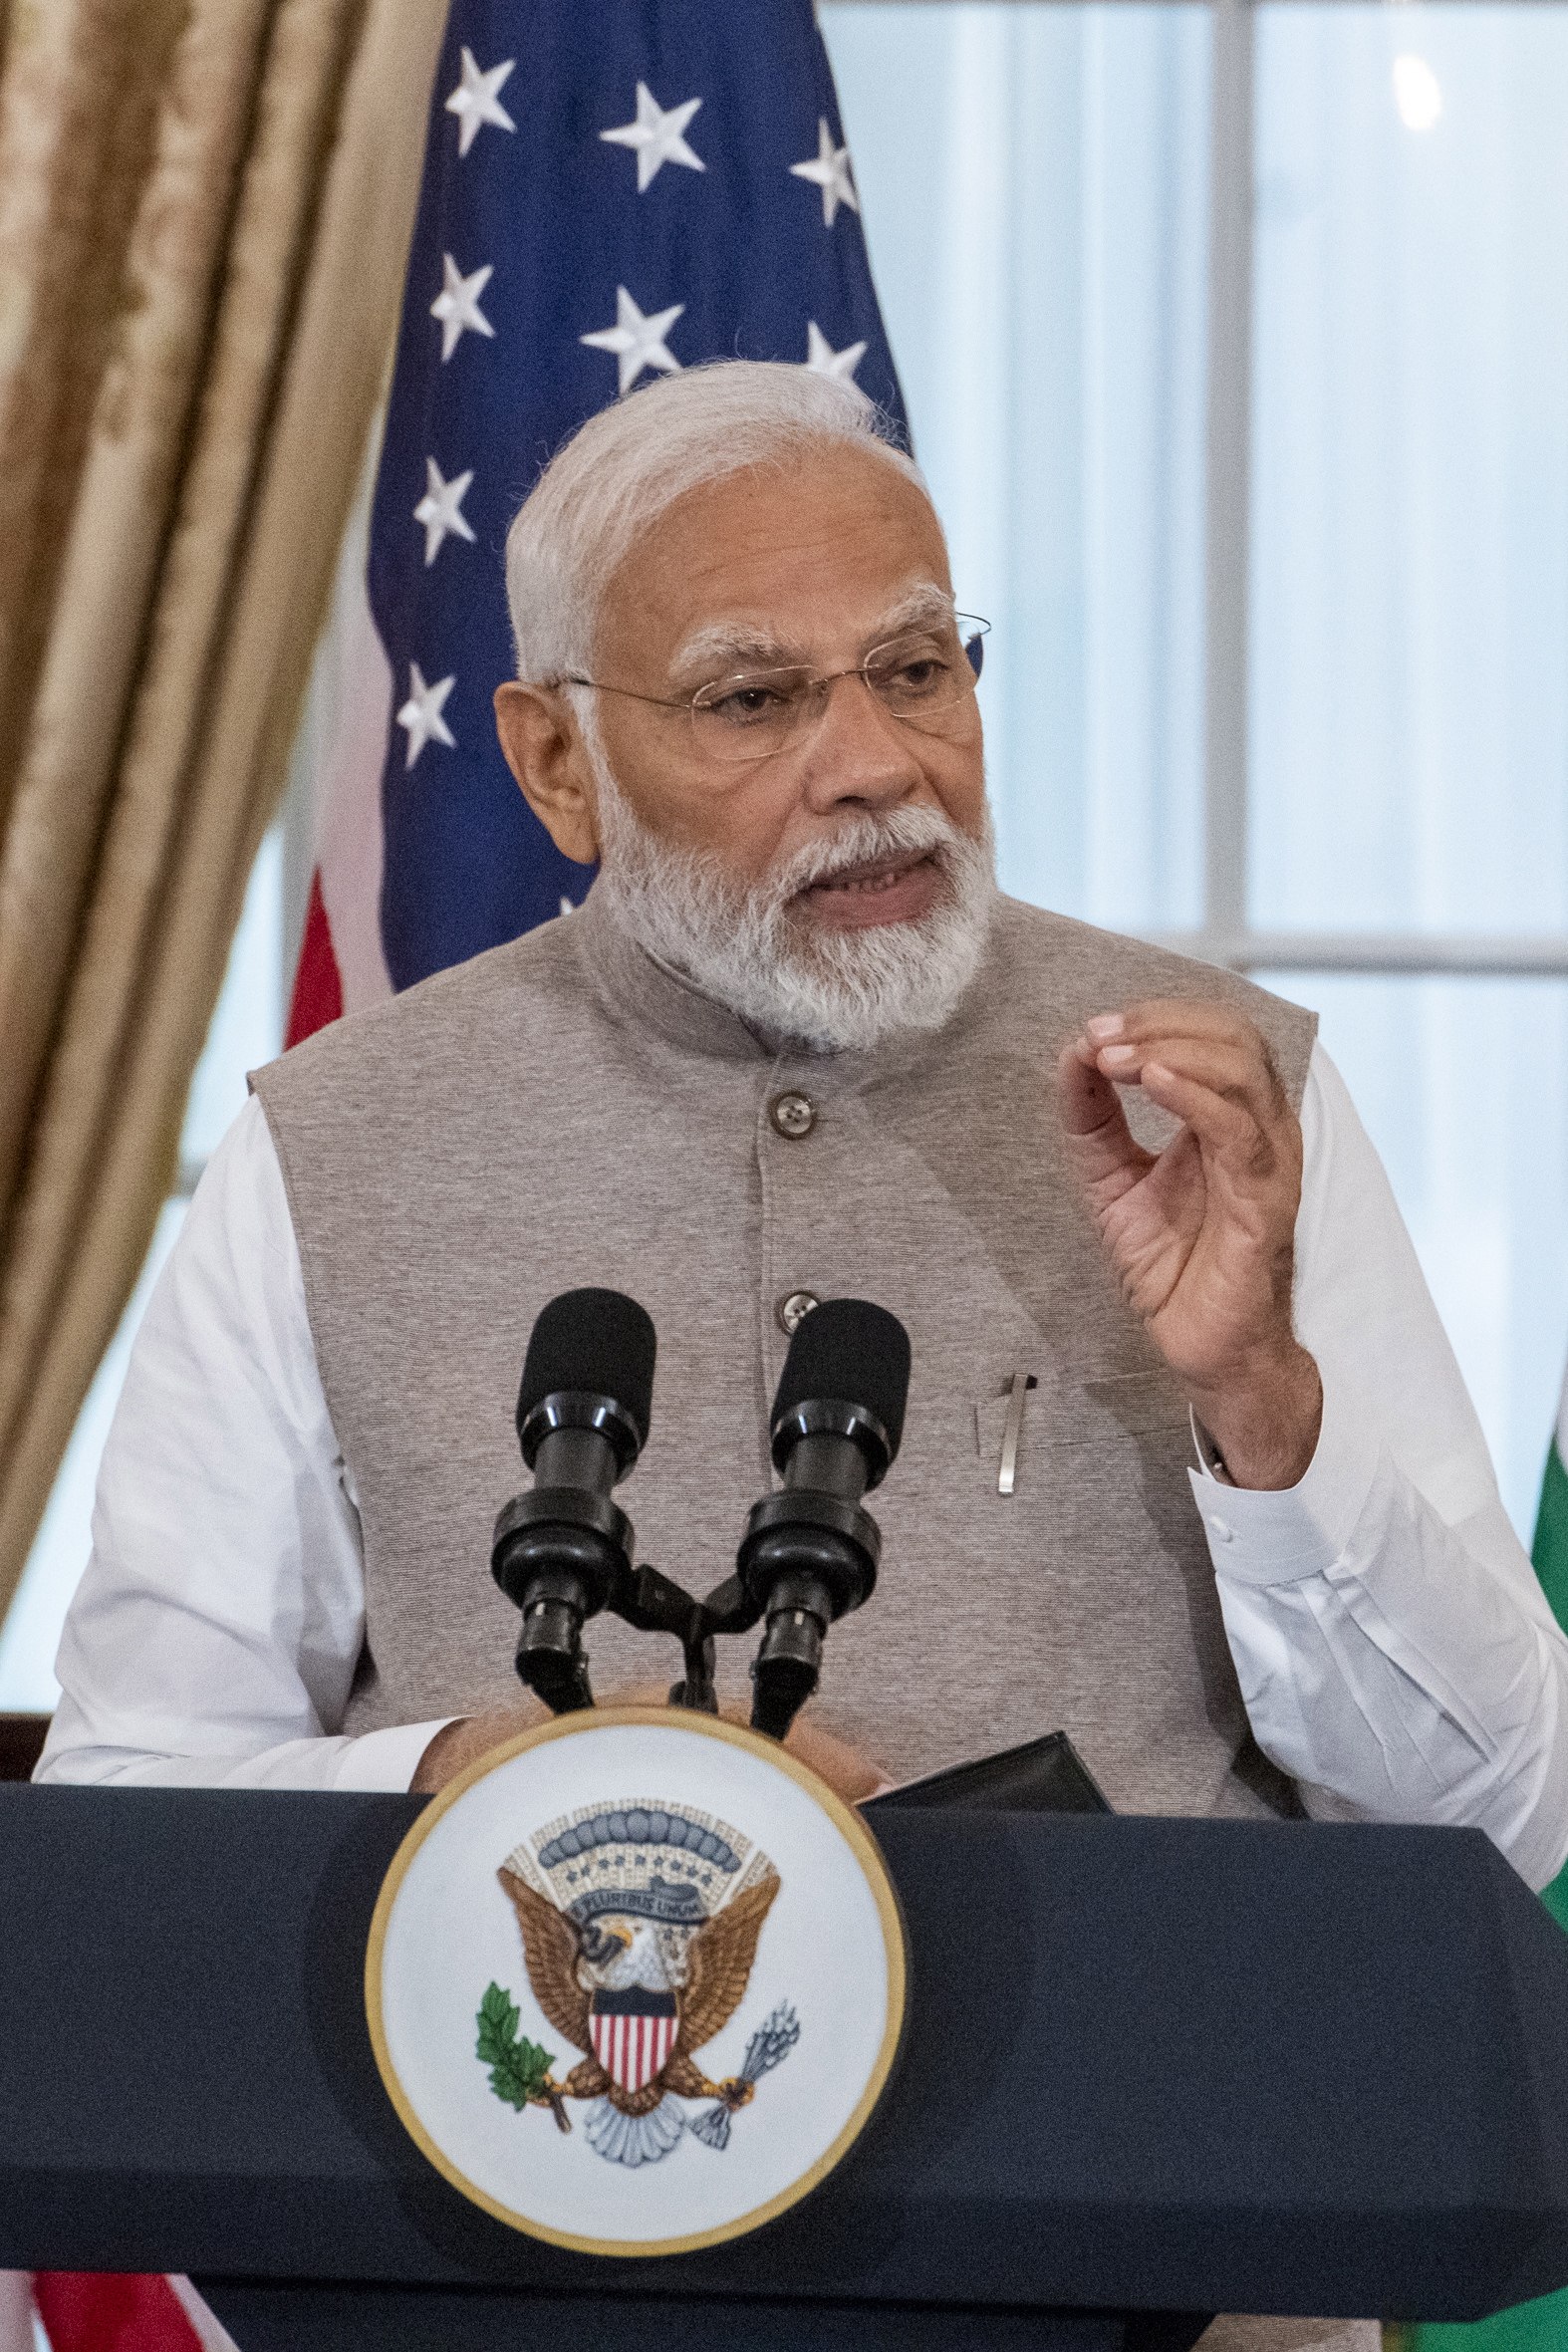 India’s Prime Minister Narendra Modi in the US on Friday. Modi travelled to Egypt on Saturday for talks with Egyptian Prime Minister Moustafa Madbouly. Photo: EPA-EFE